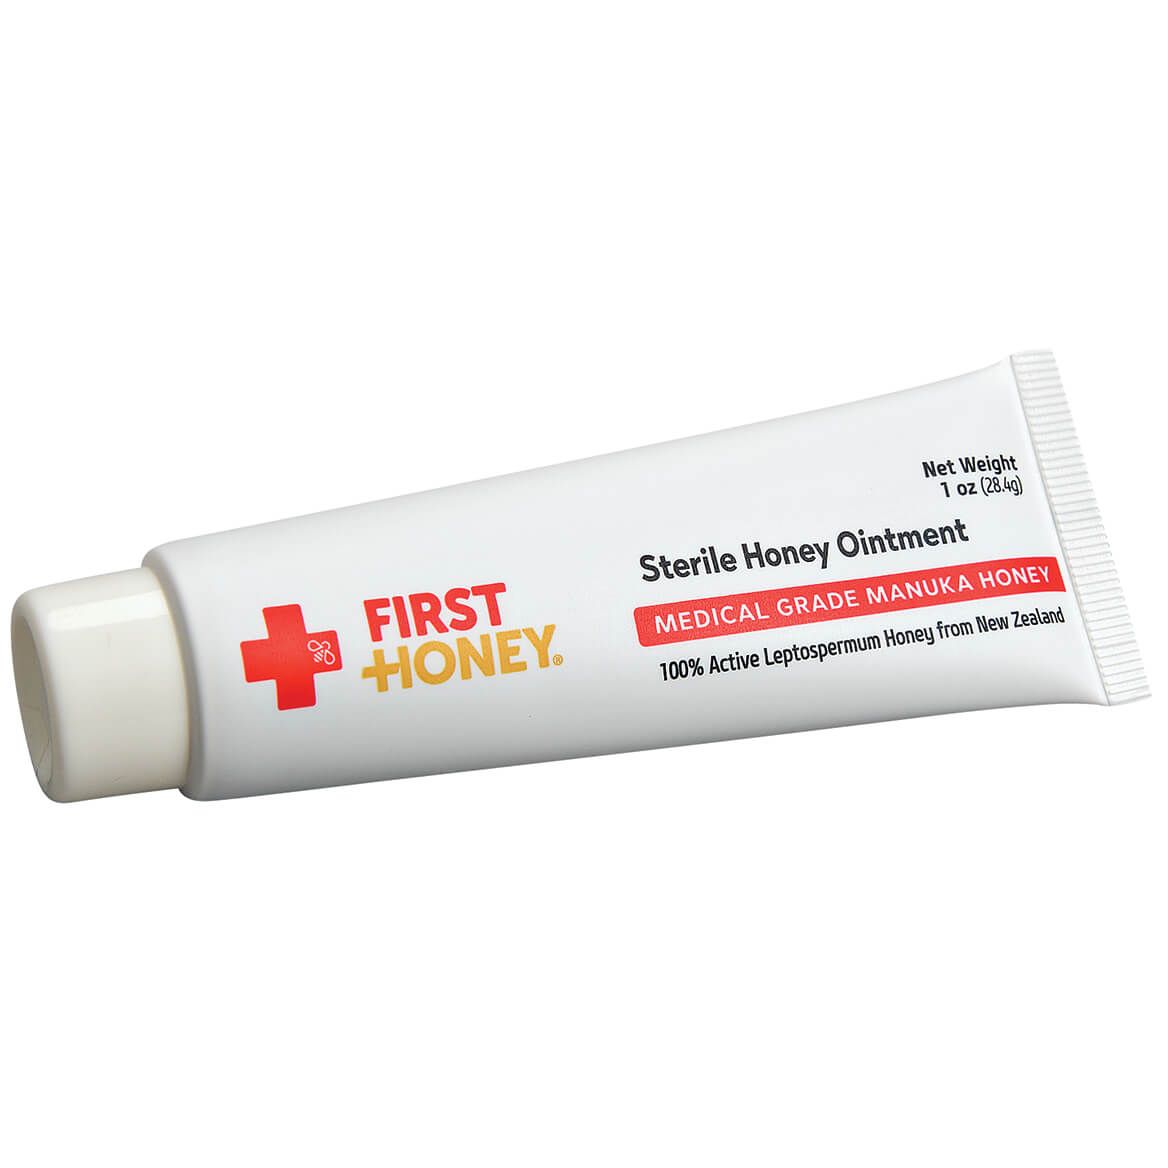 First Honey® Sterile Honey Ointment, 1 oz. + '-' + 369385